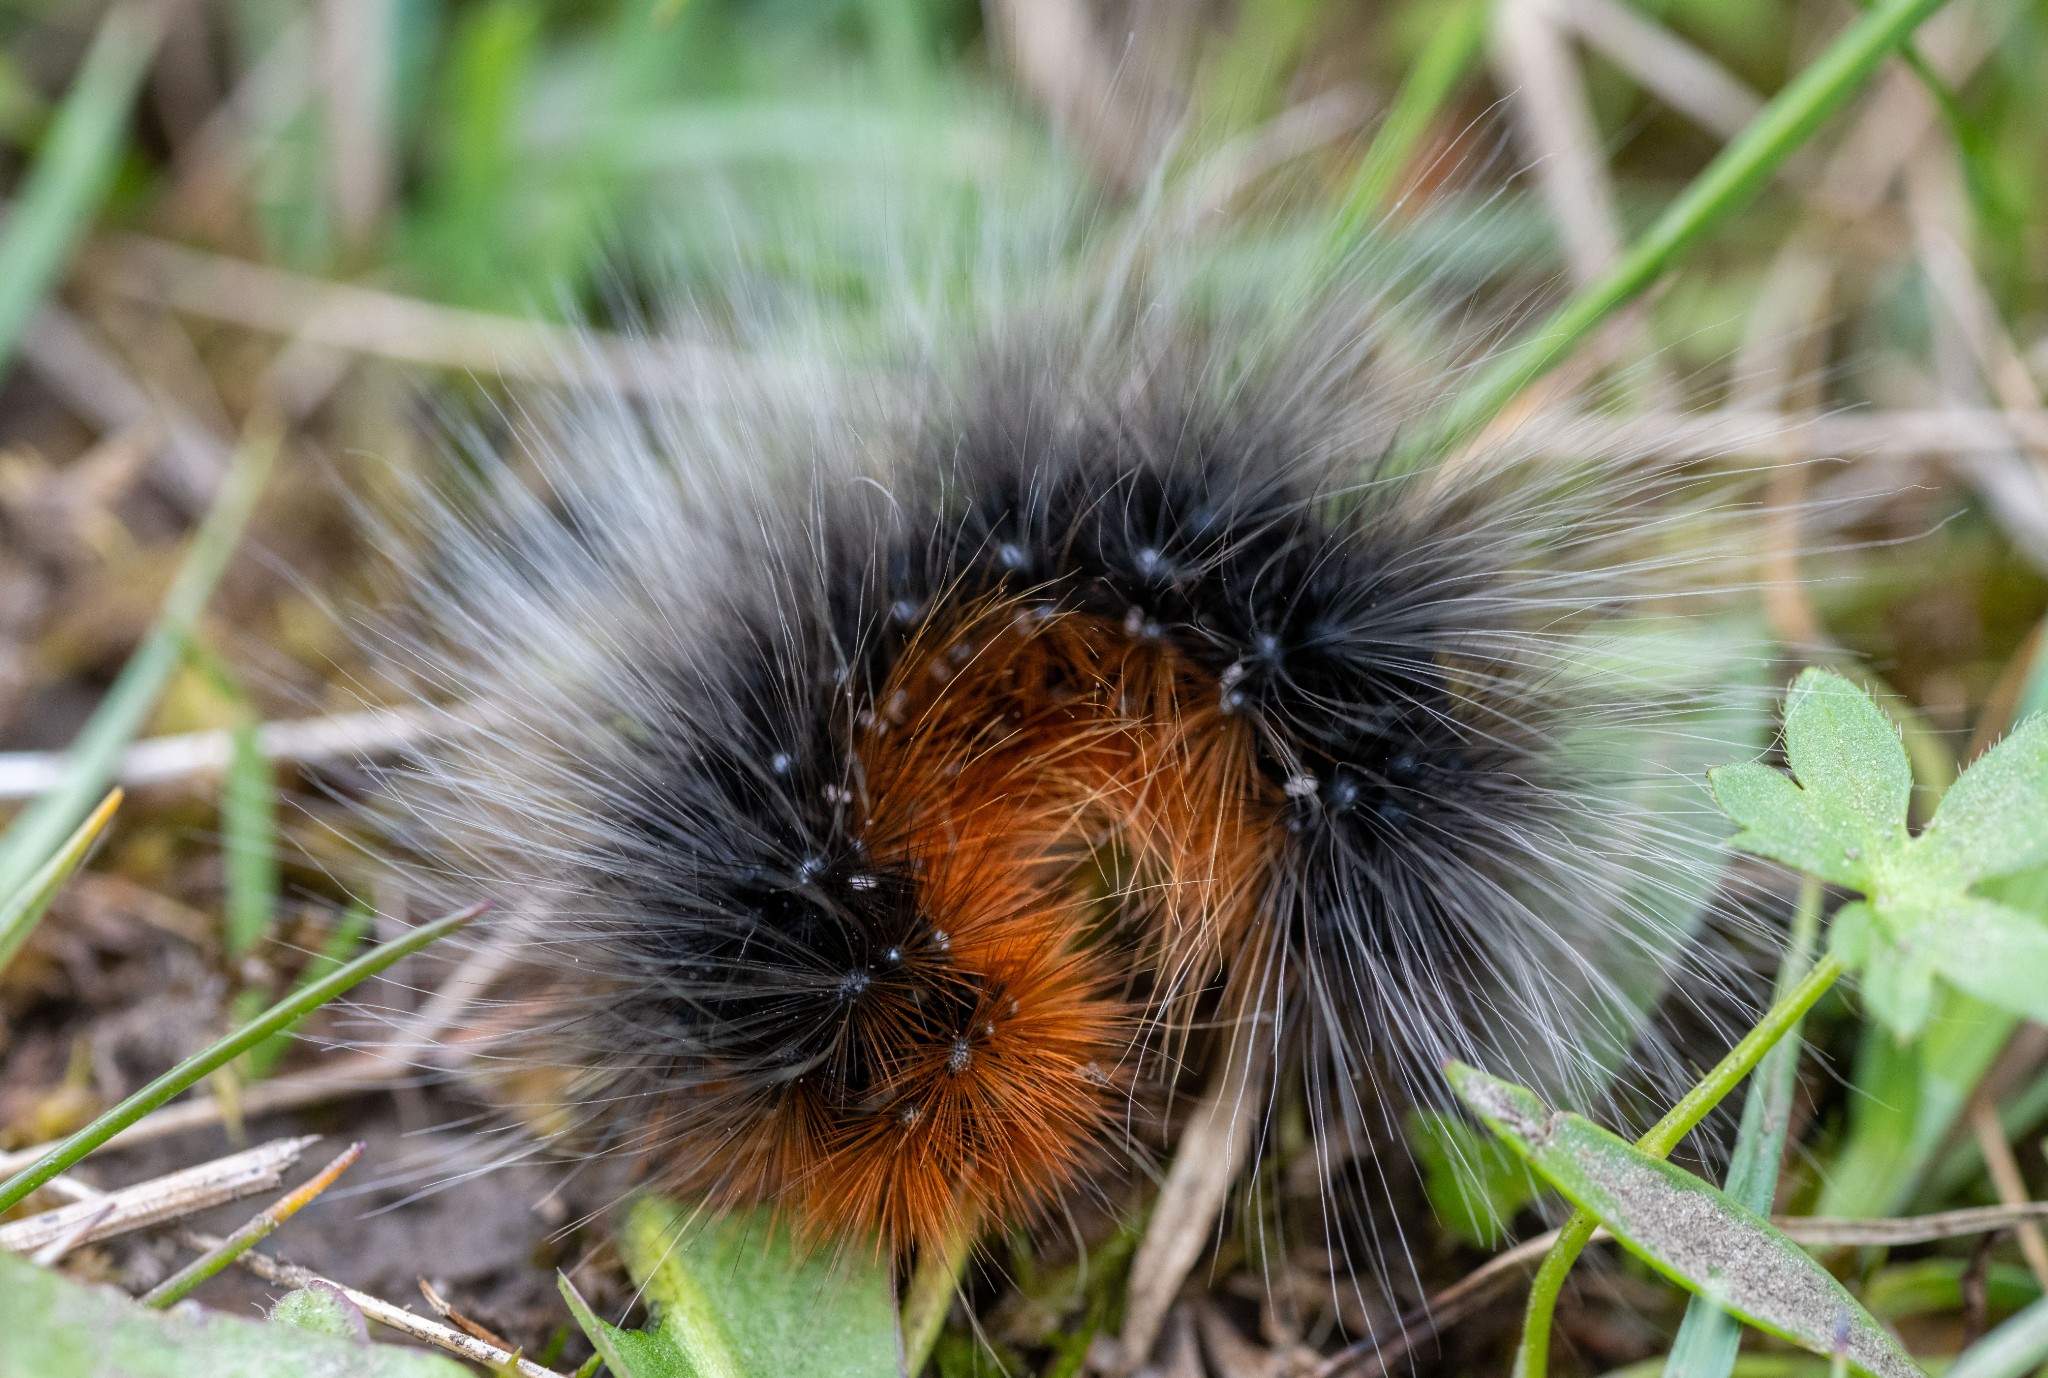 'Wooly bear' caterpillar in Orkney - image by Raymond Besant